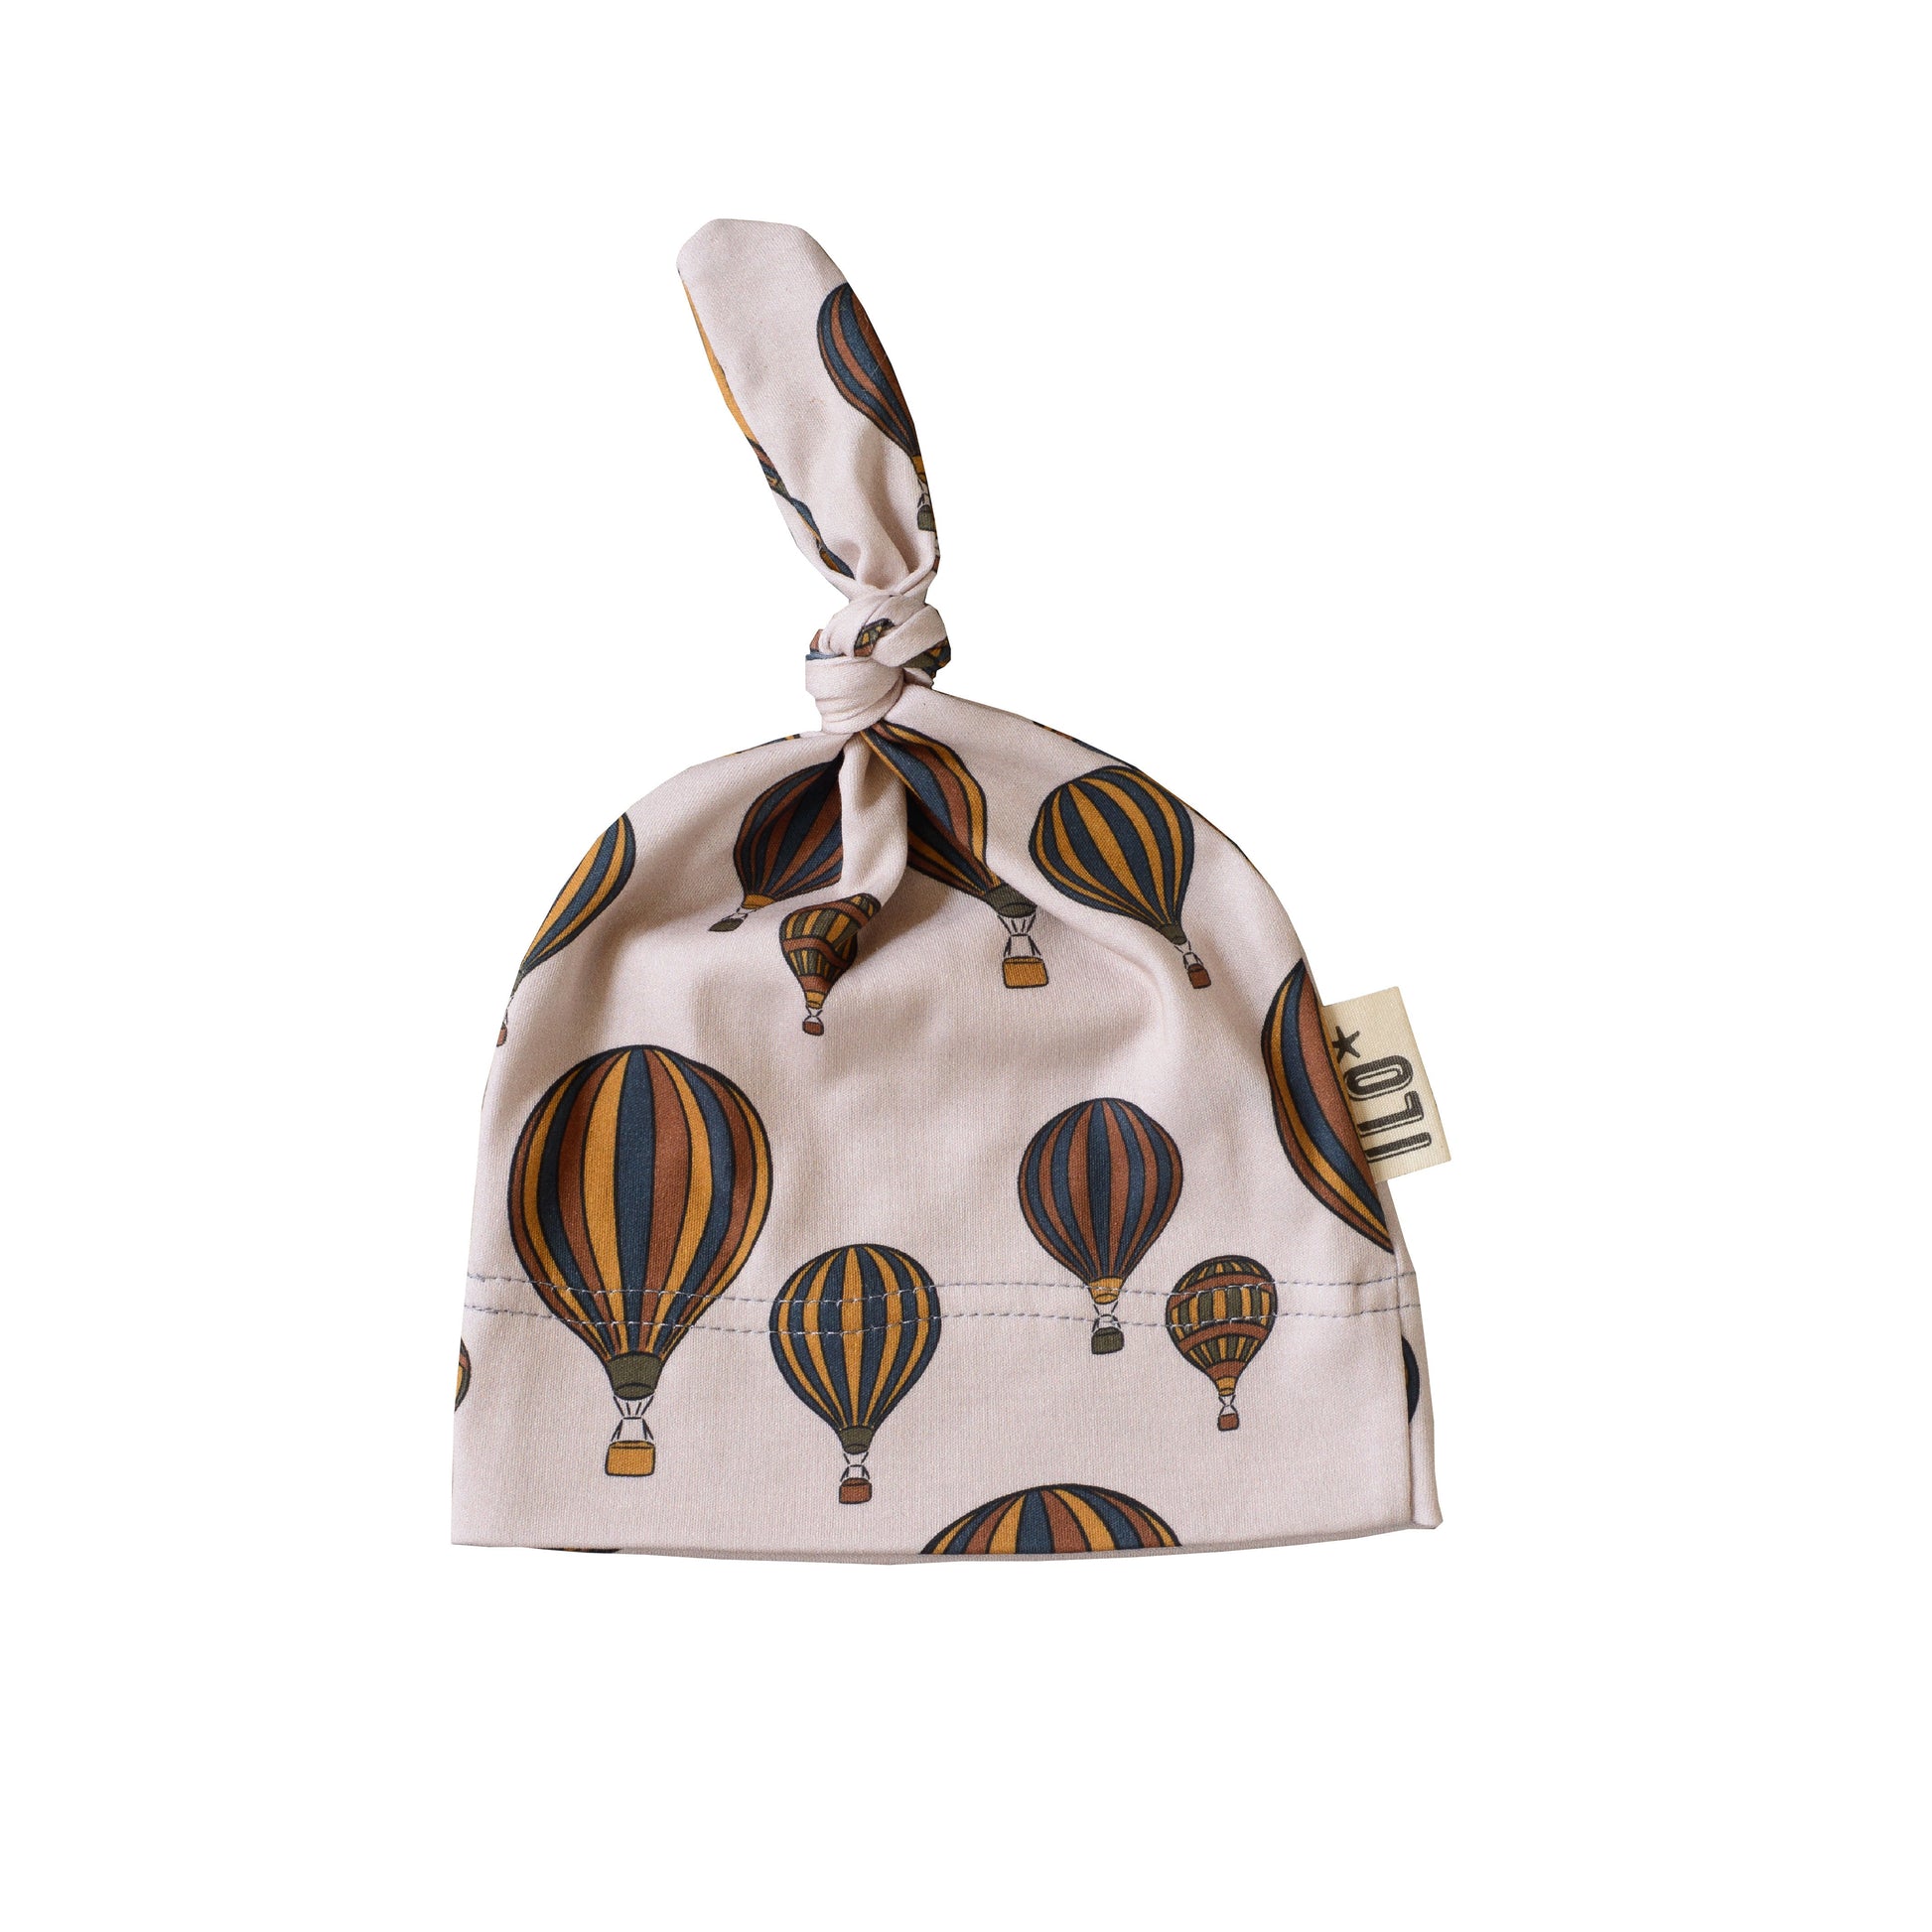 Hot Air balloons browns and blues and sand background knot hat made in Bristol, UK with 100% organic cototn interlock.